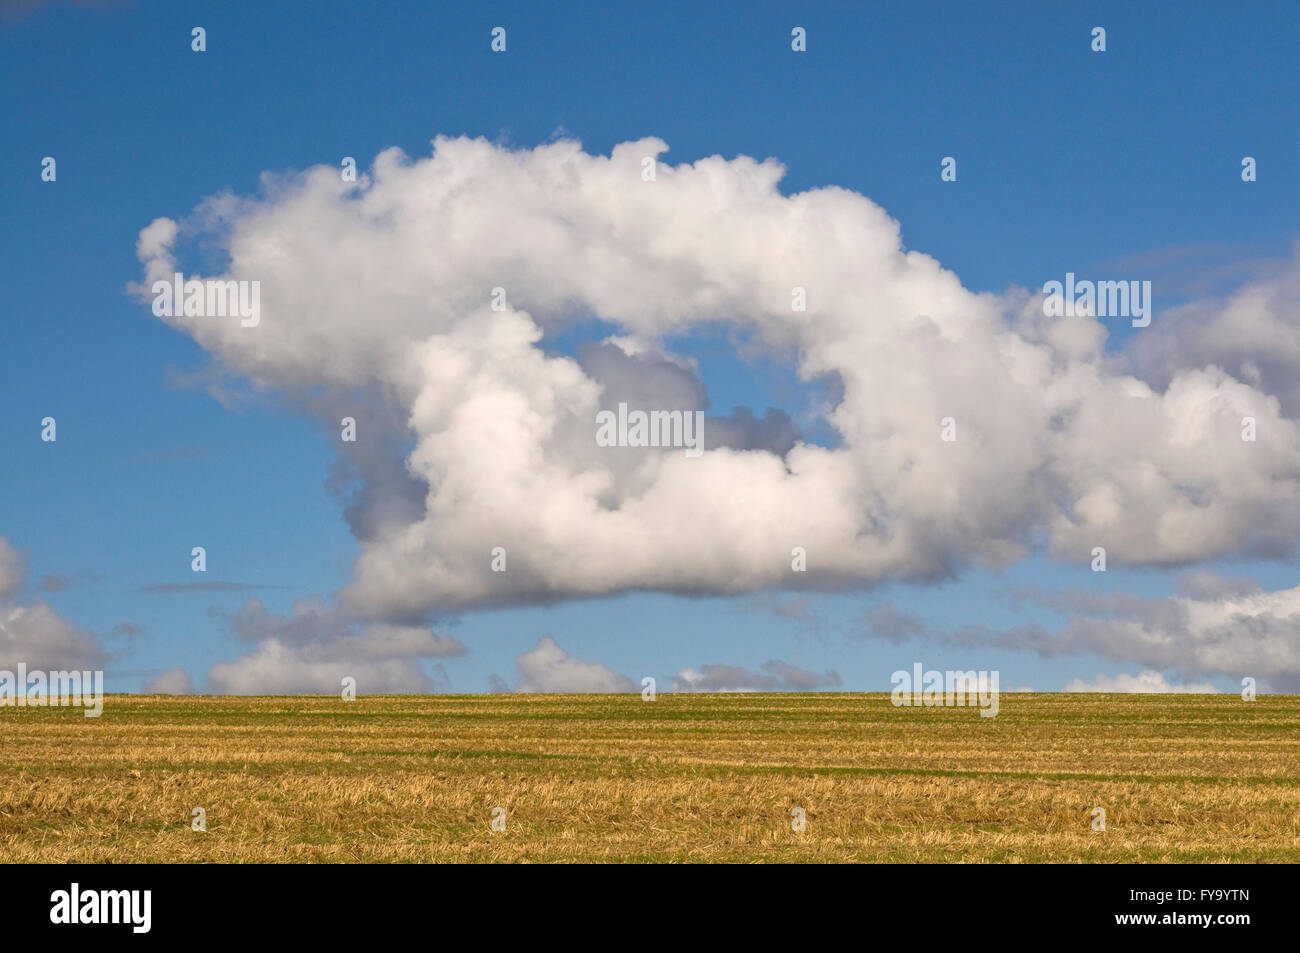 Unusually shaped cloud over harvested field, Mecklenburg-Vorpommern, Germany Stock Photo